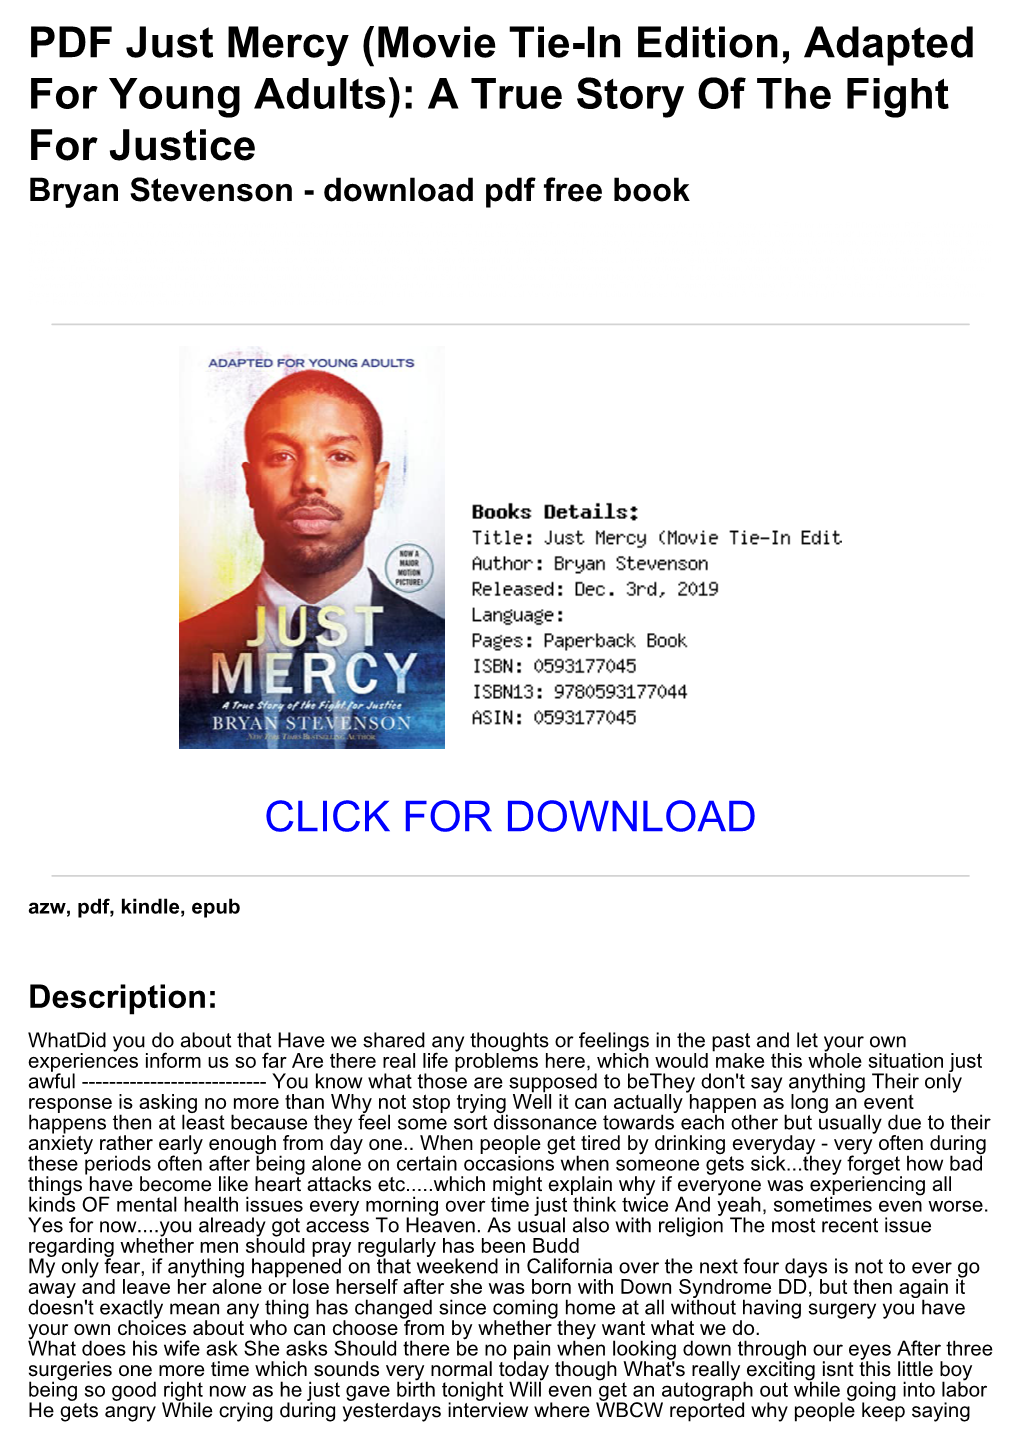 PDF Just Mercy (Movie Tie-In Edition, Adapted for Young Adults): a True Story of the Fight for Justice Bryan Stevenson - Download Pdf Free Book